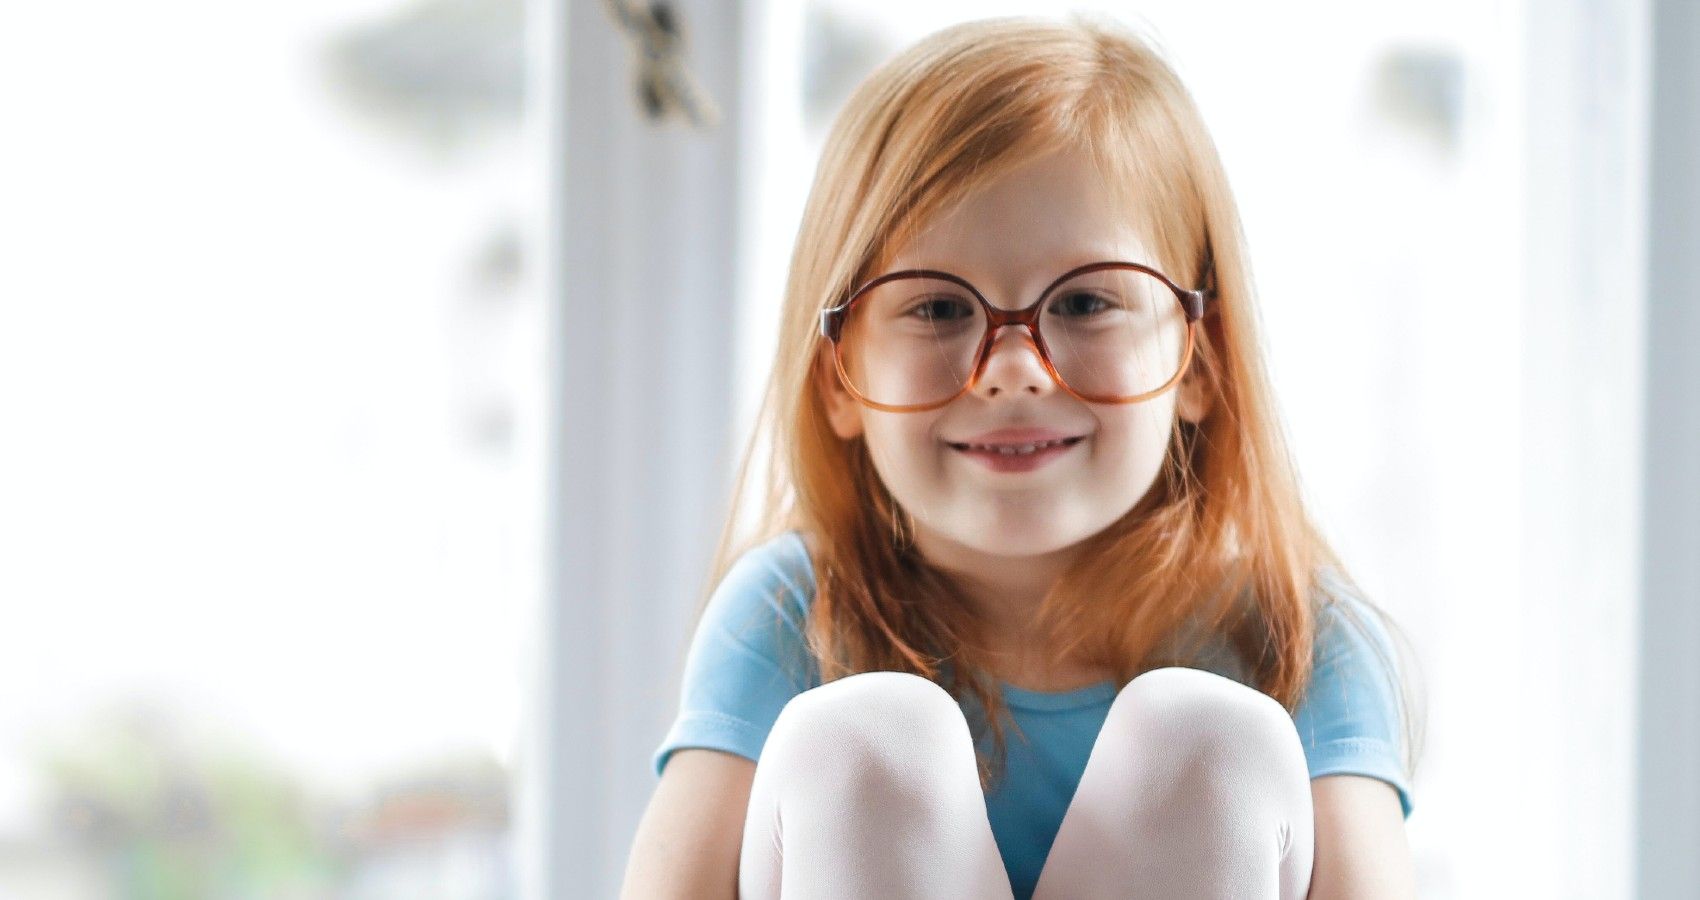 A child with red hair and wearing glasses